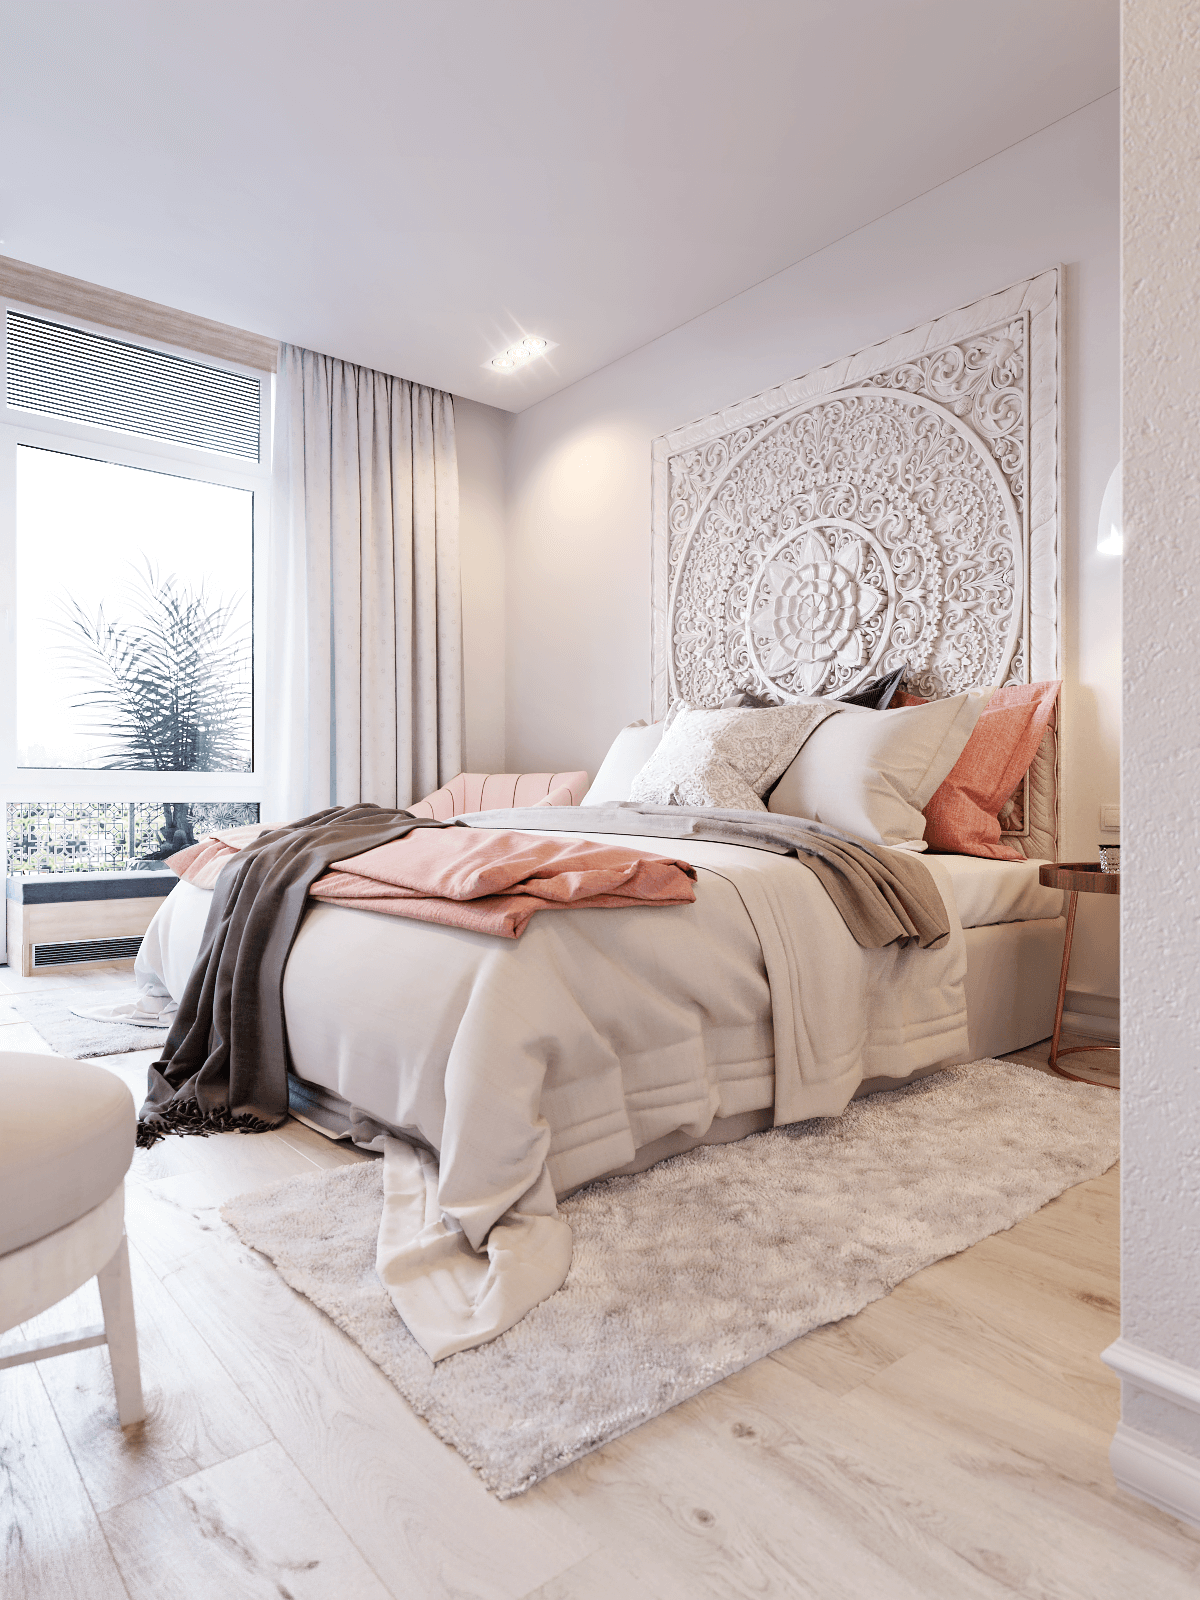 25 Best Bedroom Wall Decor Ideas And Designs For 2021